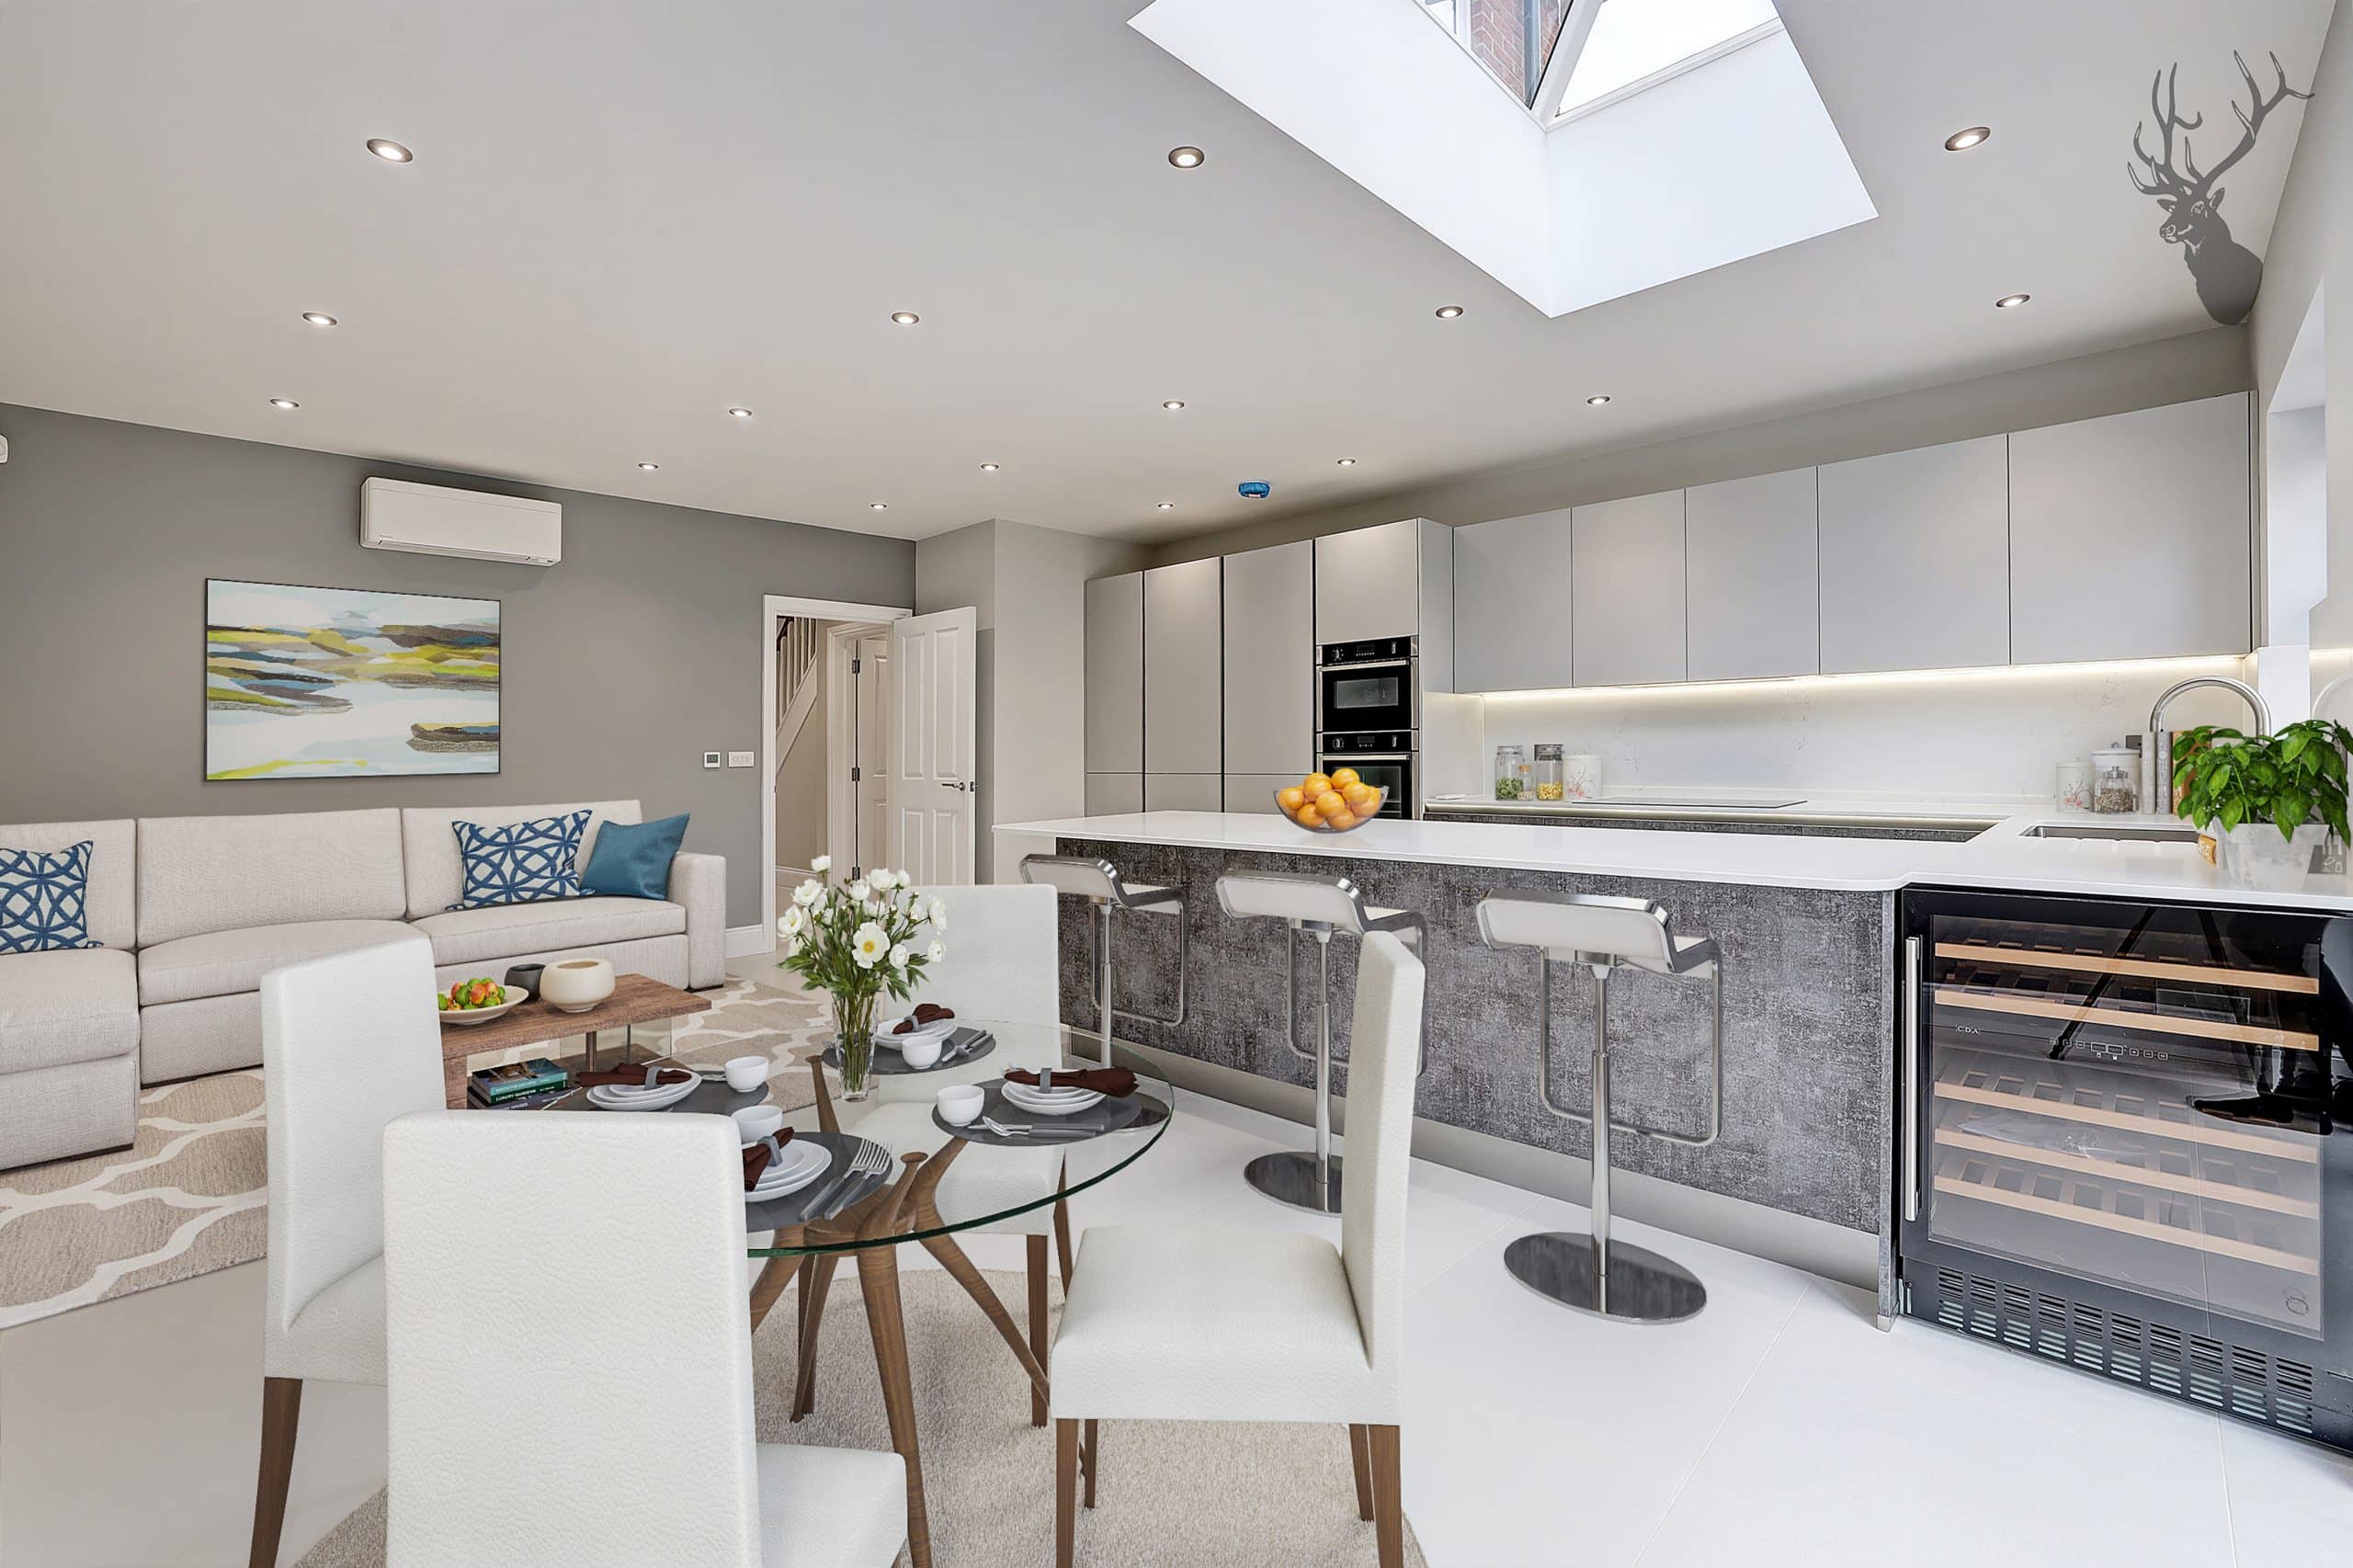 modern kitchen diner in Chingford semi-detached property development project